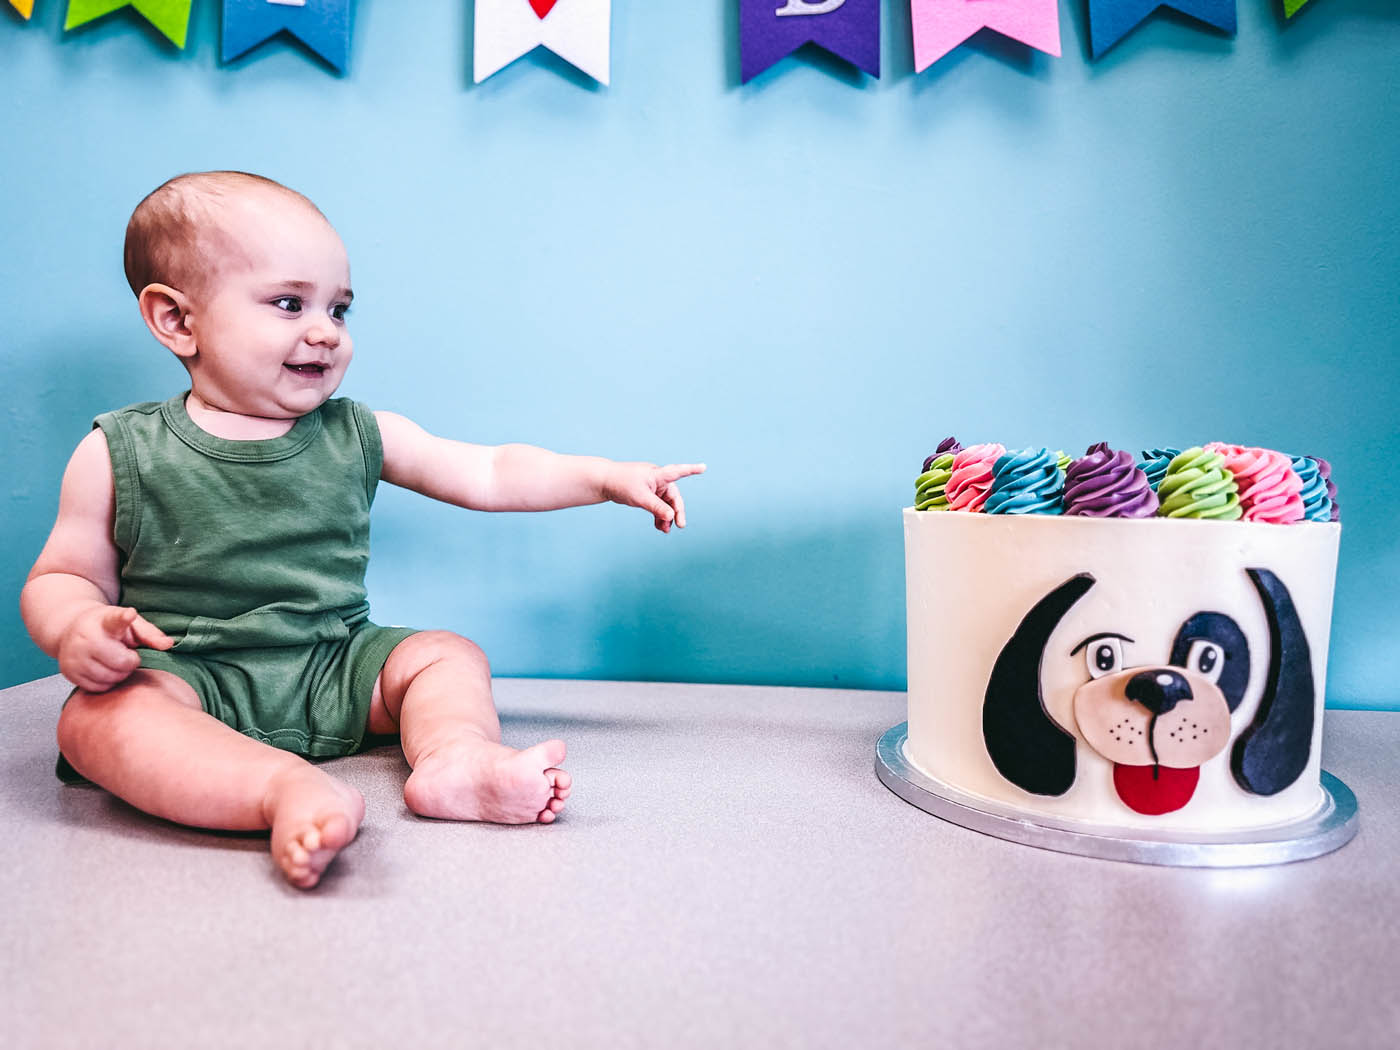 A little baby boy sitting next to a Rompy cake, book a birthday party in Katy, TX!